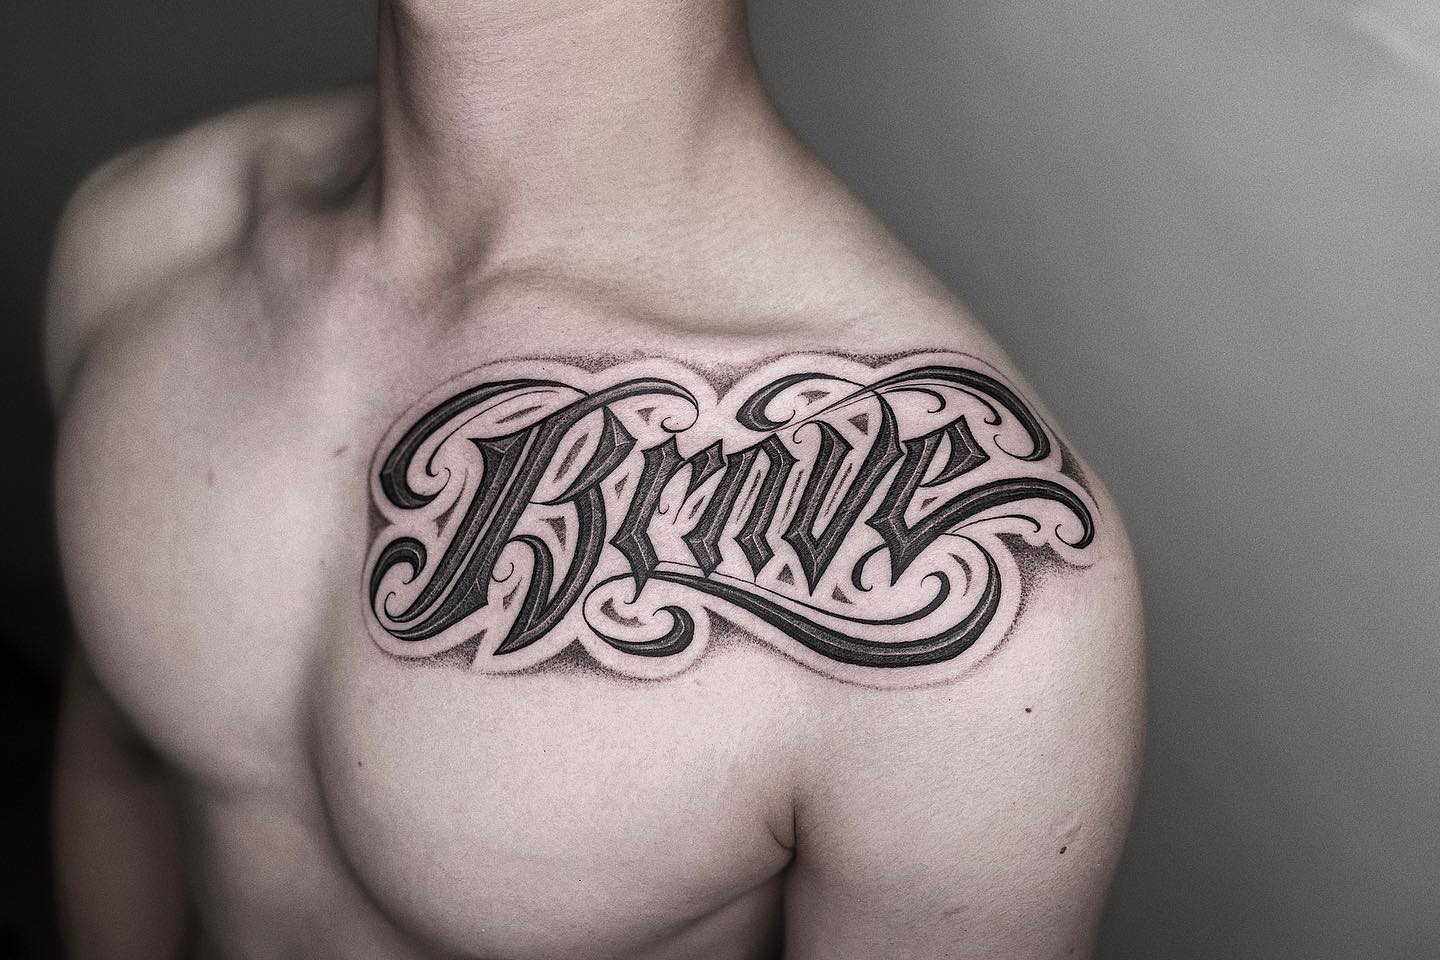 Gangster fonts for tattoos